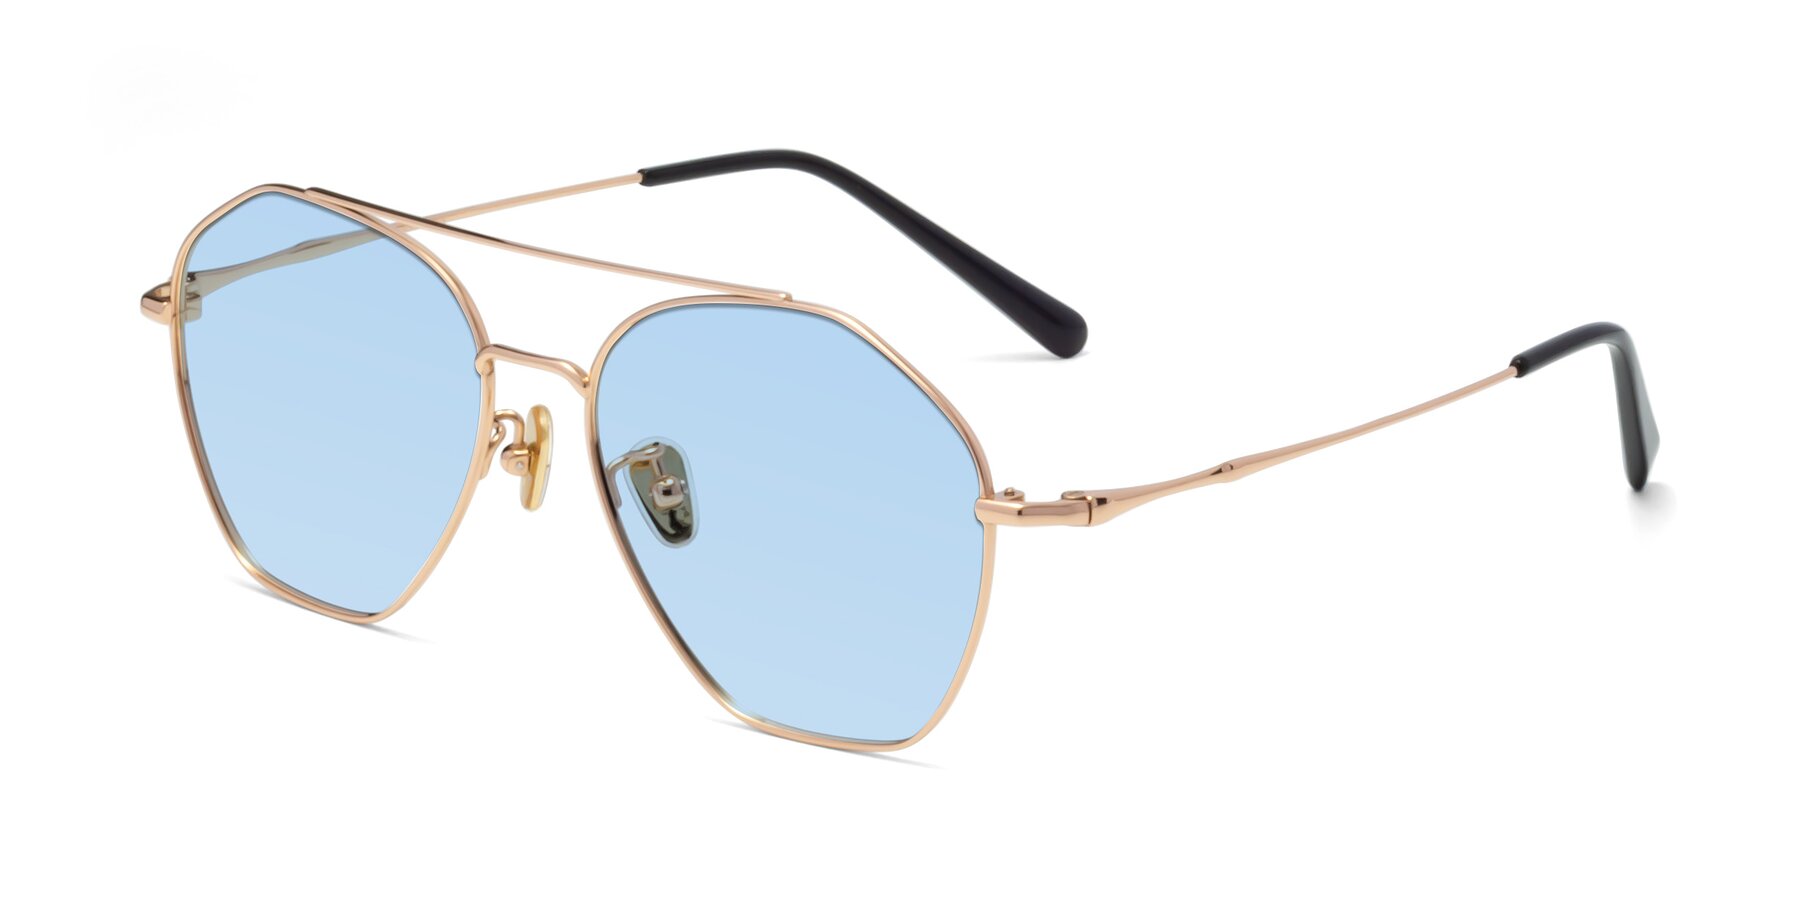 Angle of Linton in Rose Gold with Light Blue Tinted Lenses